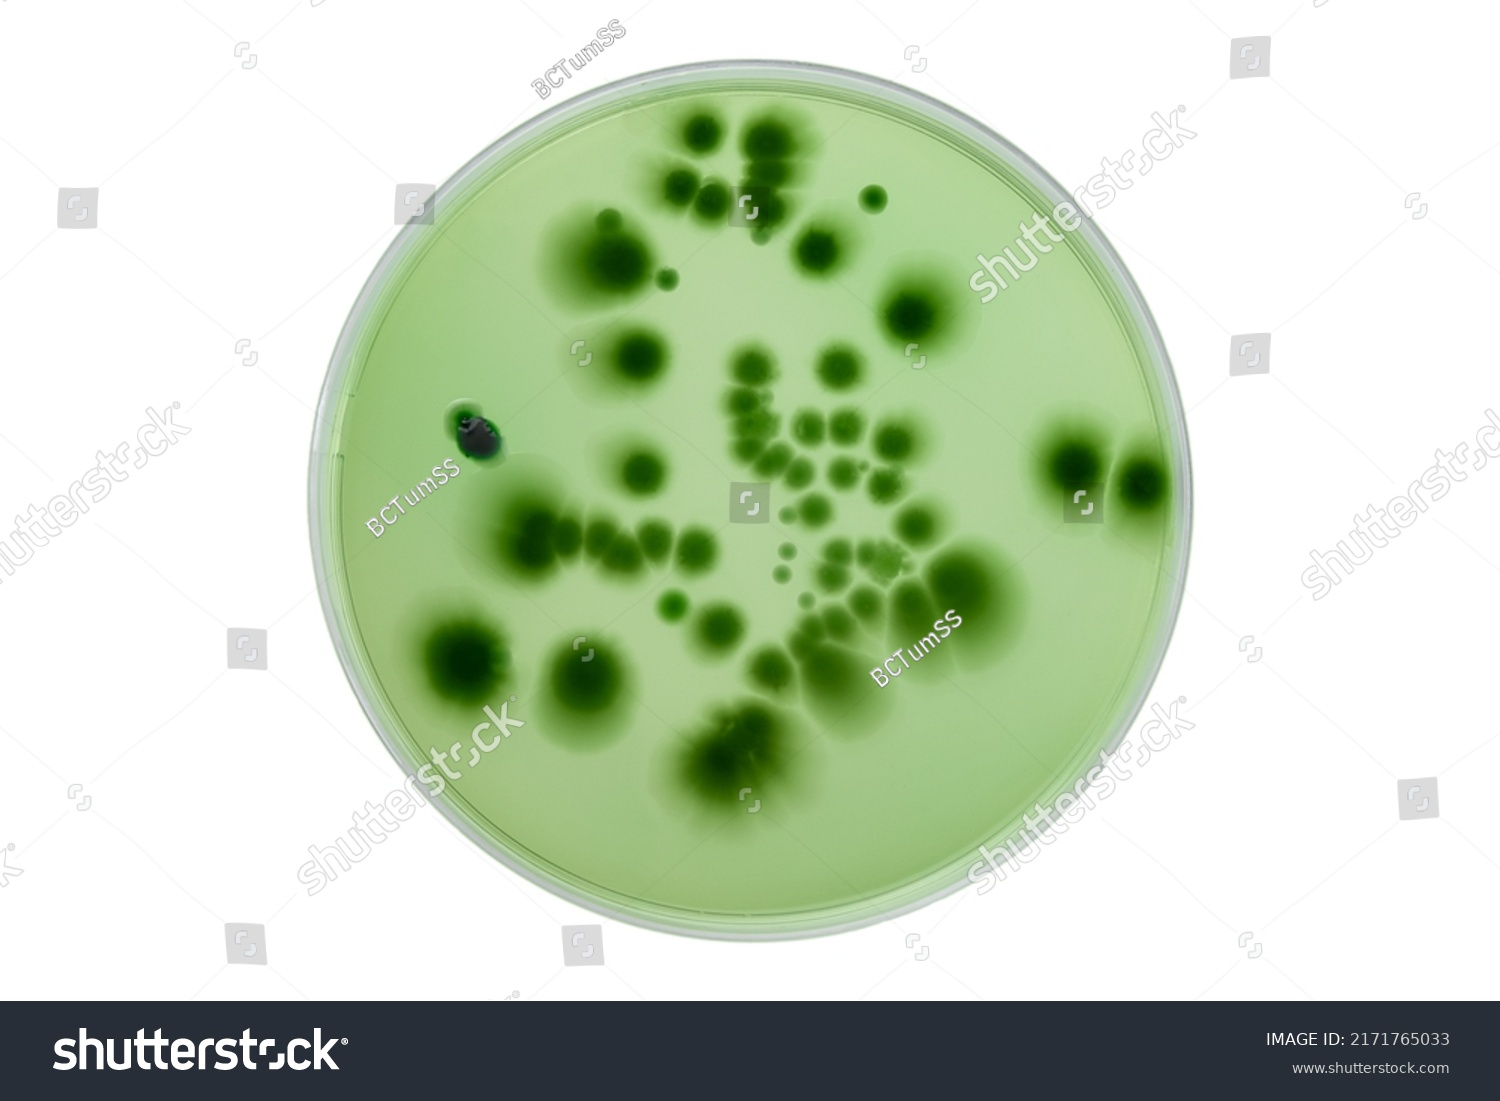 Hand with Petri dish or culture media with bacteria on white background with clipping, Test various germs, virus, Coronavirus, COVID-19, Microbial population count, Food science. #2171765033